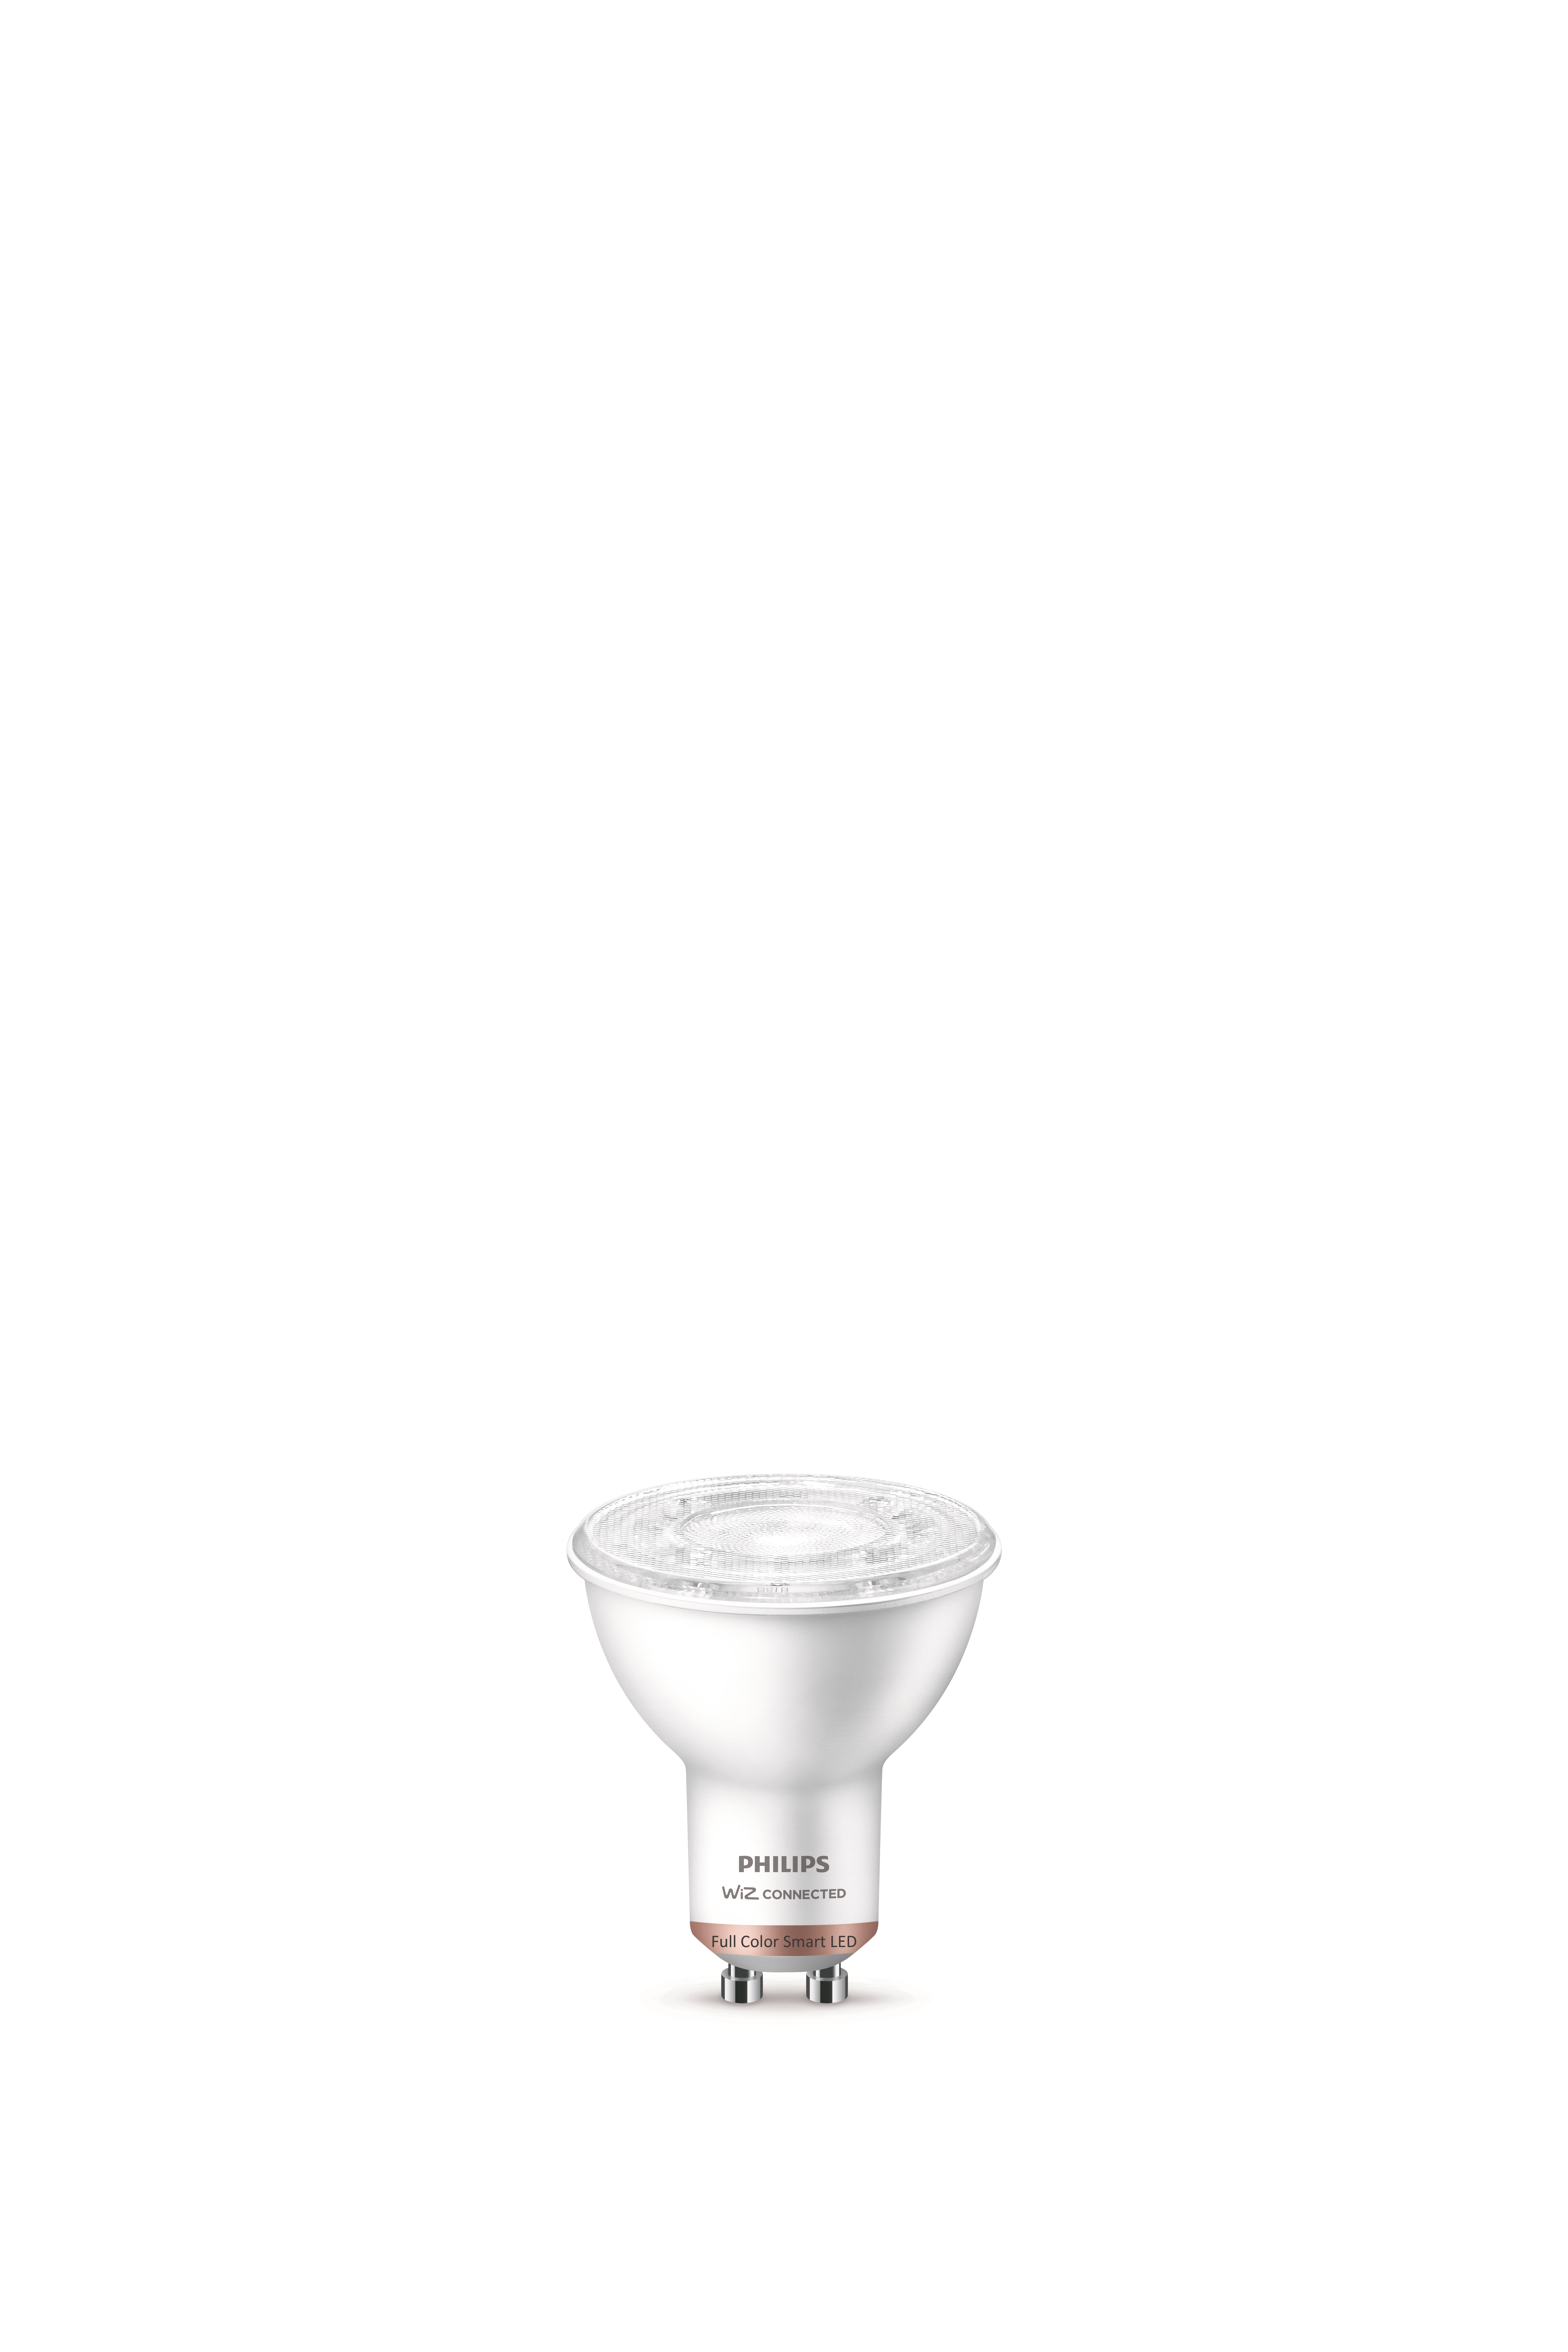 PHILIPS Smart LED GU10, WiZ connected, 4,7 W, 345 lm, Full color, dimmbar